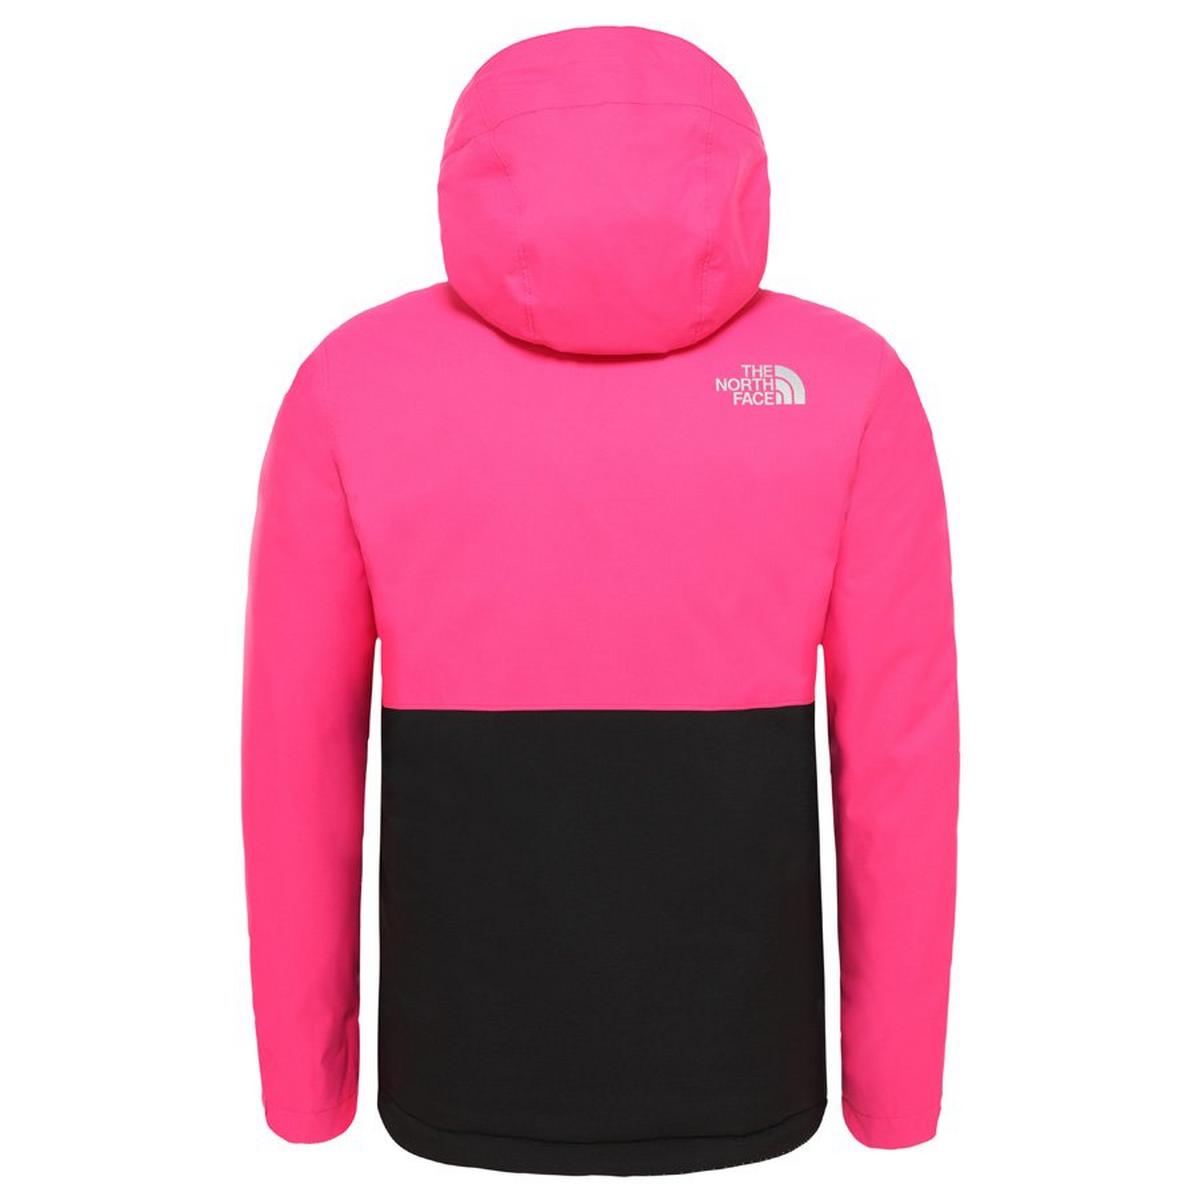 The North Face Kids' Youth Snowquest Plus Jacket